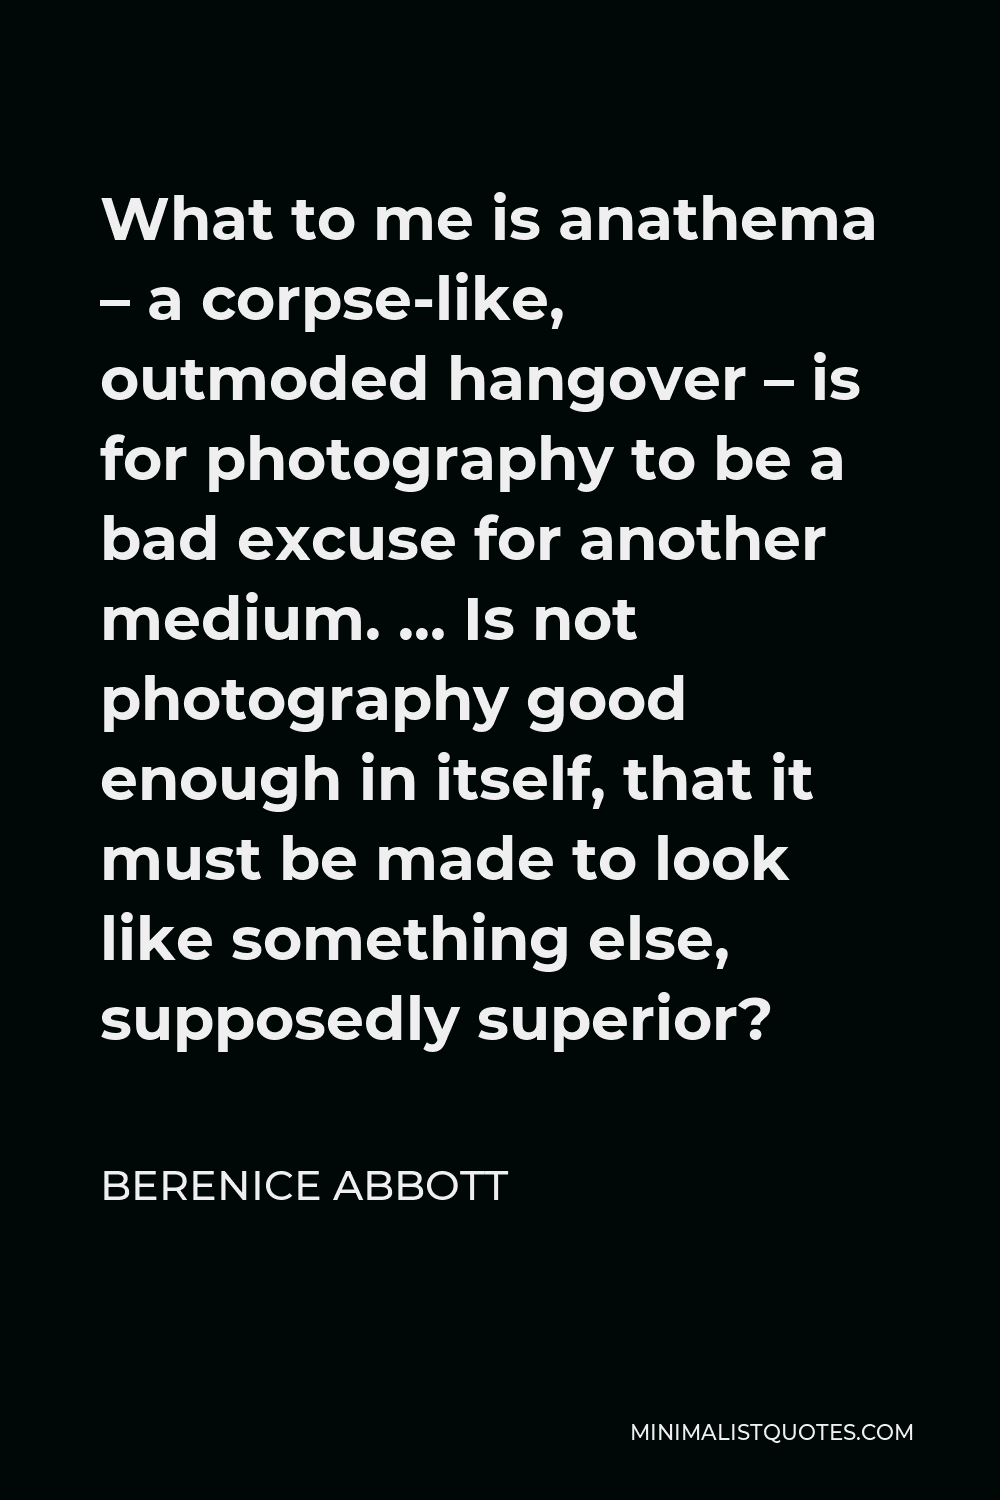 Berenice Abbott Quote - What to me is anathema – a corpse-like, outmoded hangover – is for photography to be a bad excuse for another medium. … Is not photography good enough in itself, that it must be made to look like something else, supposedly superior?